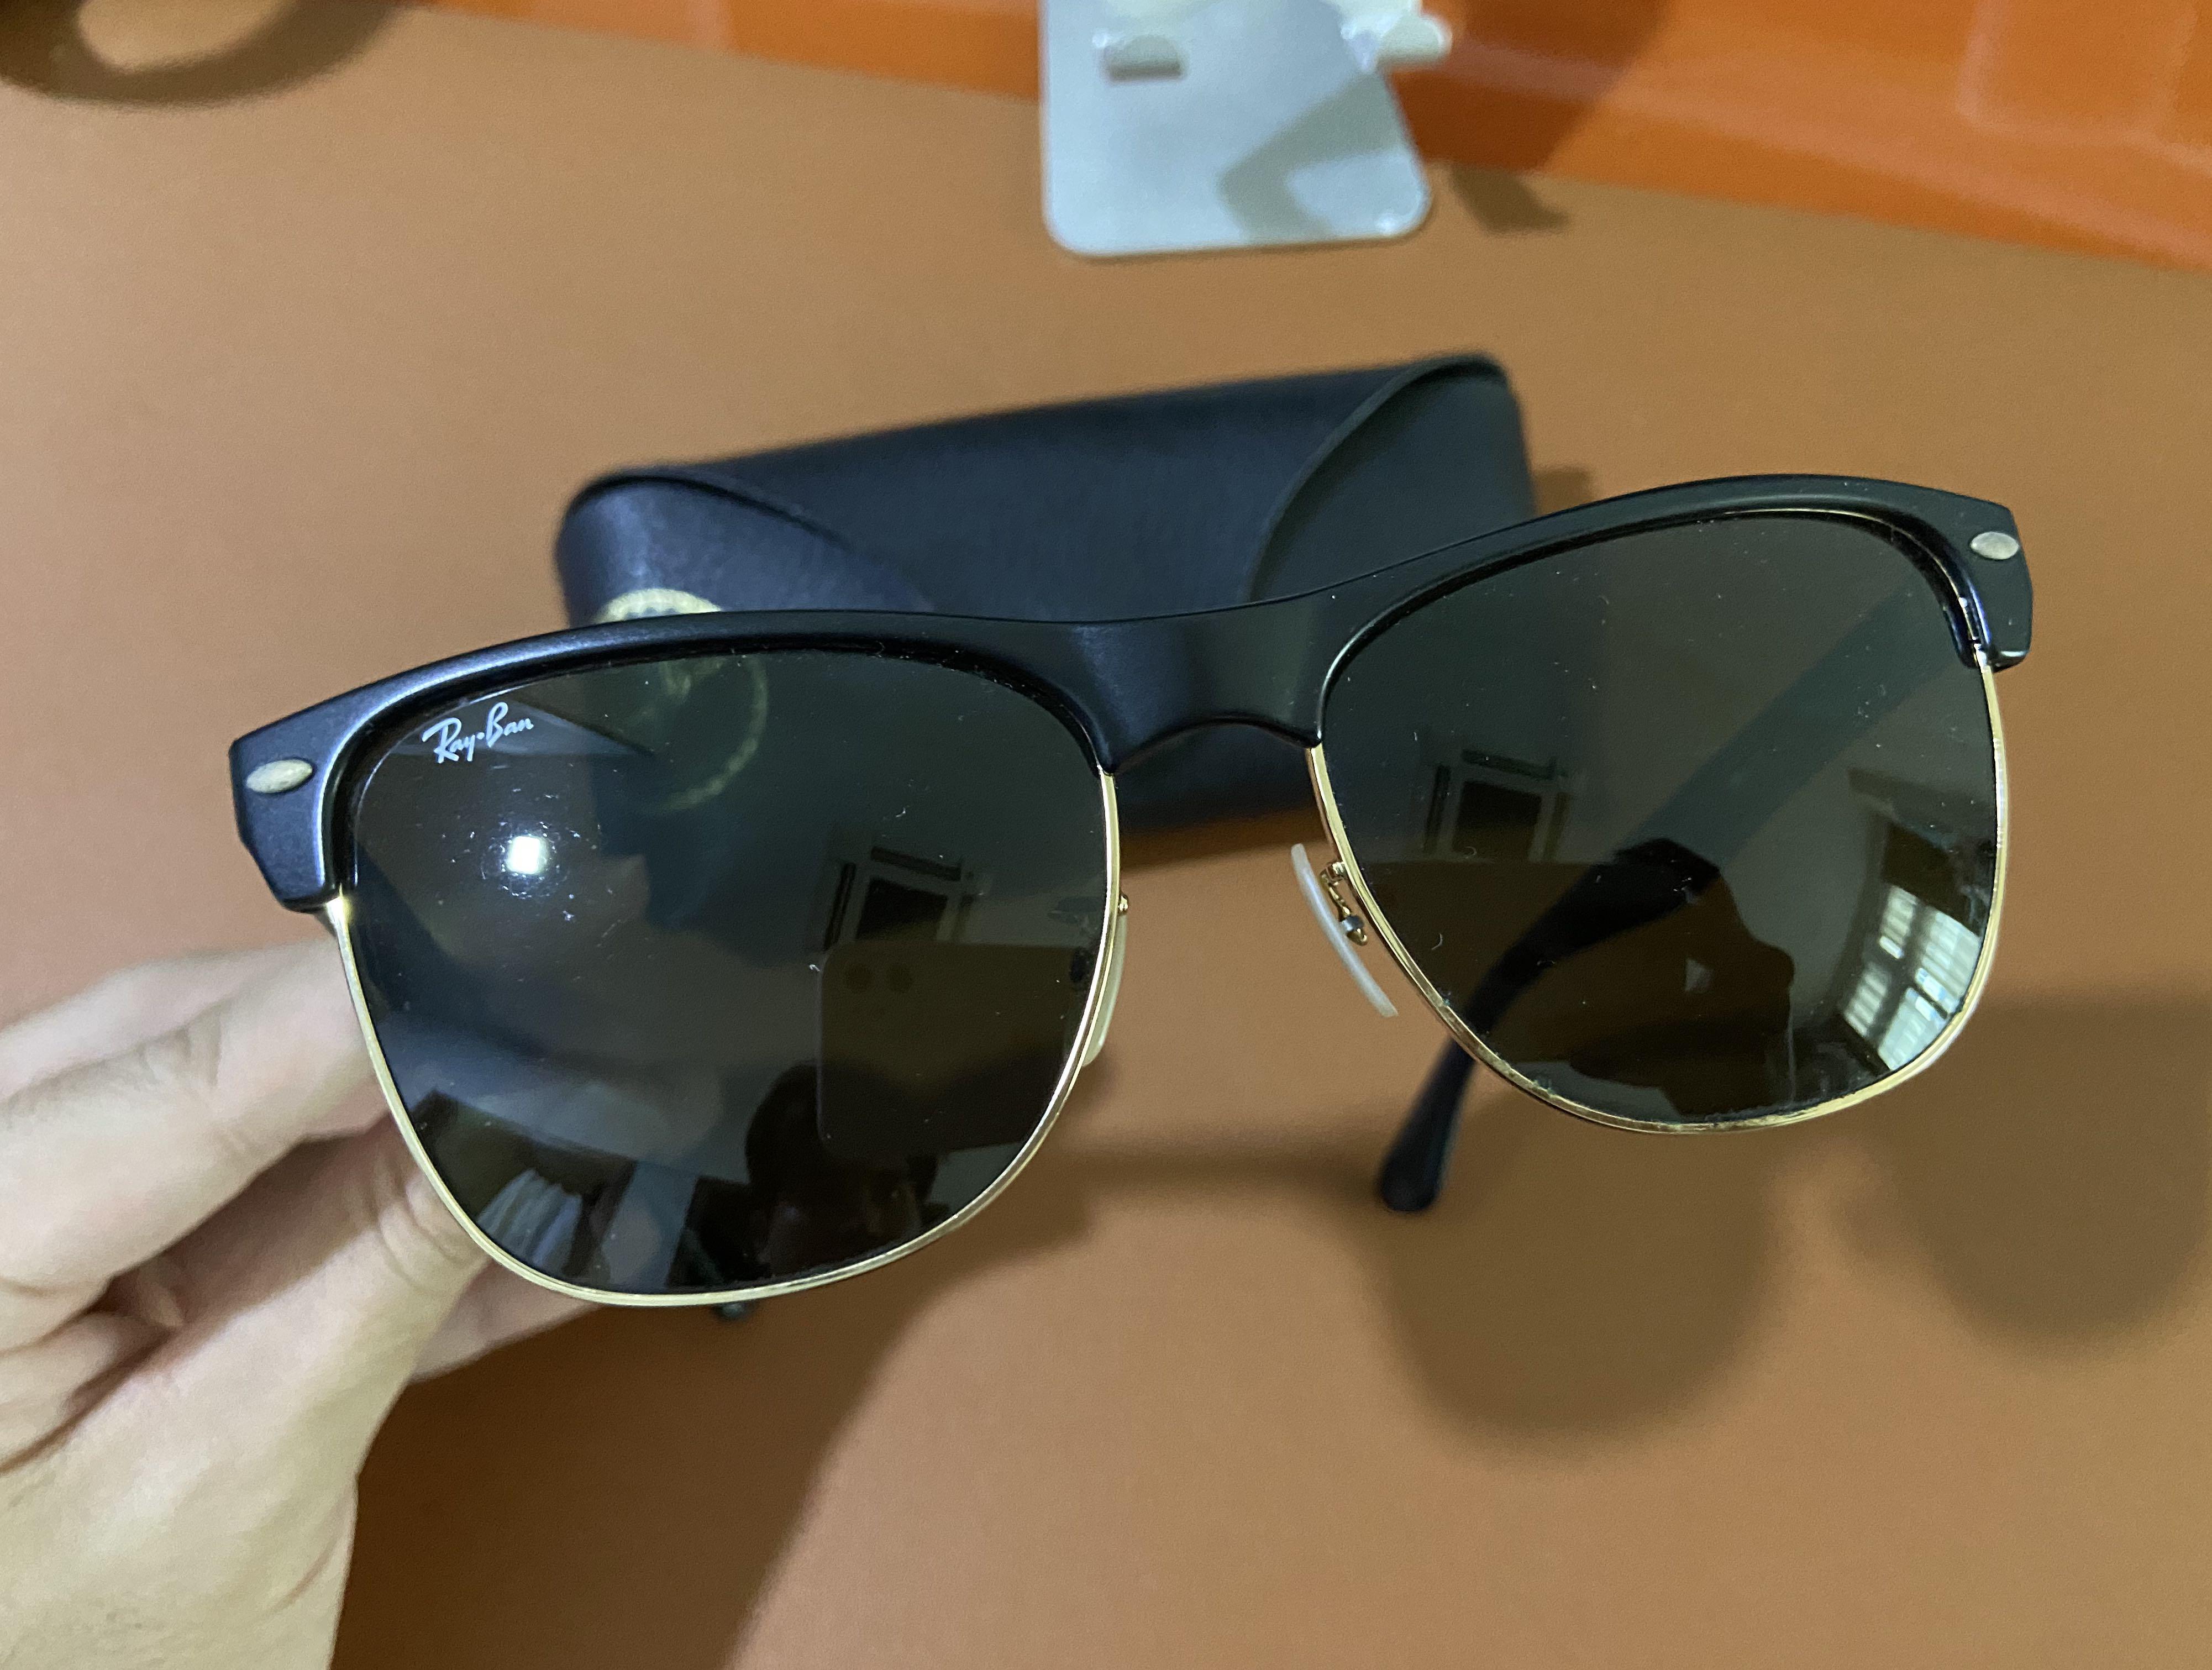 Rayban Clubmaster Metal Sunglasses Authentic Men S Fashion Accessories Eyewear Sunglasses On Carousell